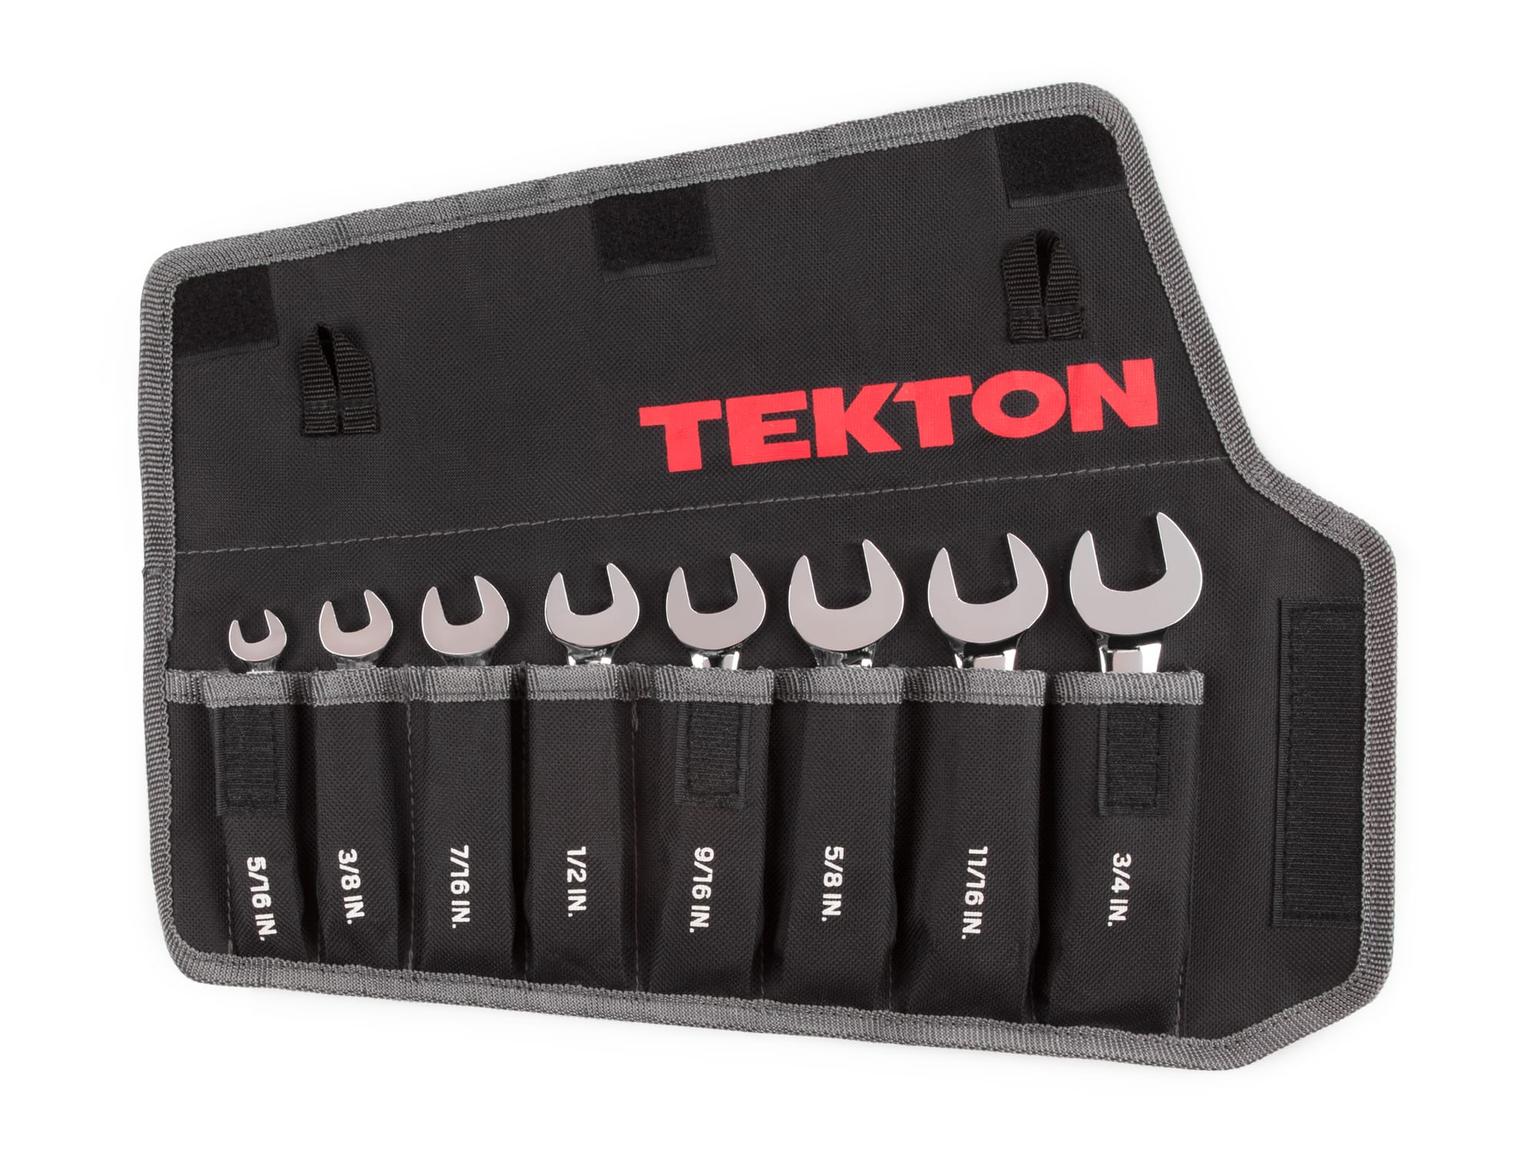 TEKTON WRN01086-T Stubby Combination Wrench Set with Pouch, 8-Piece (5/16 - 3/4 in.)